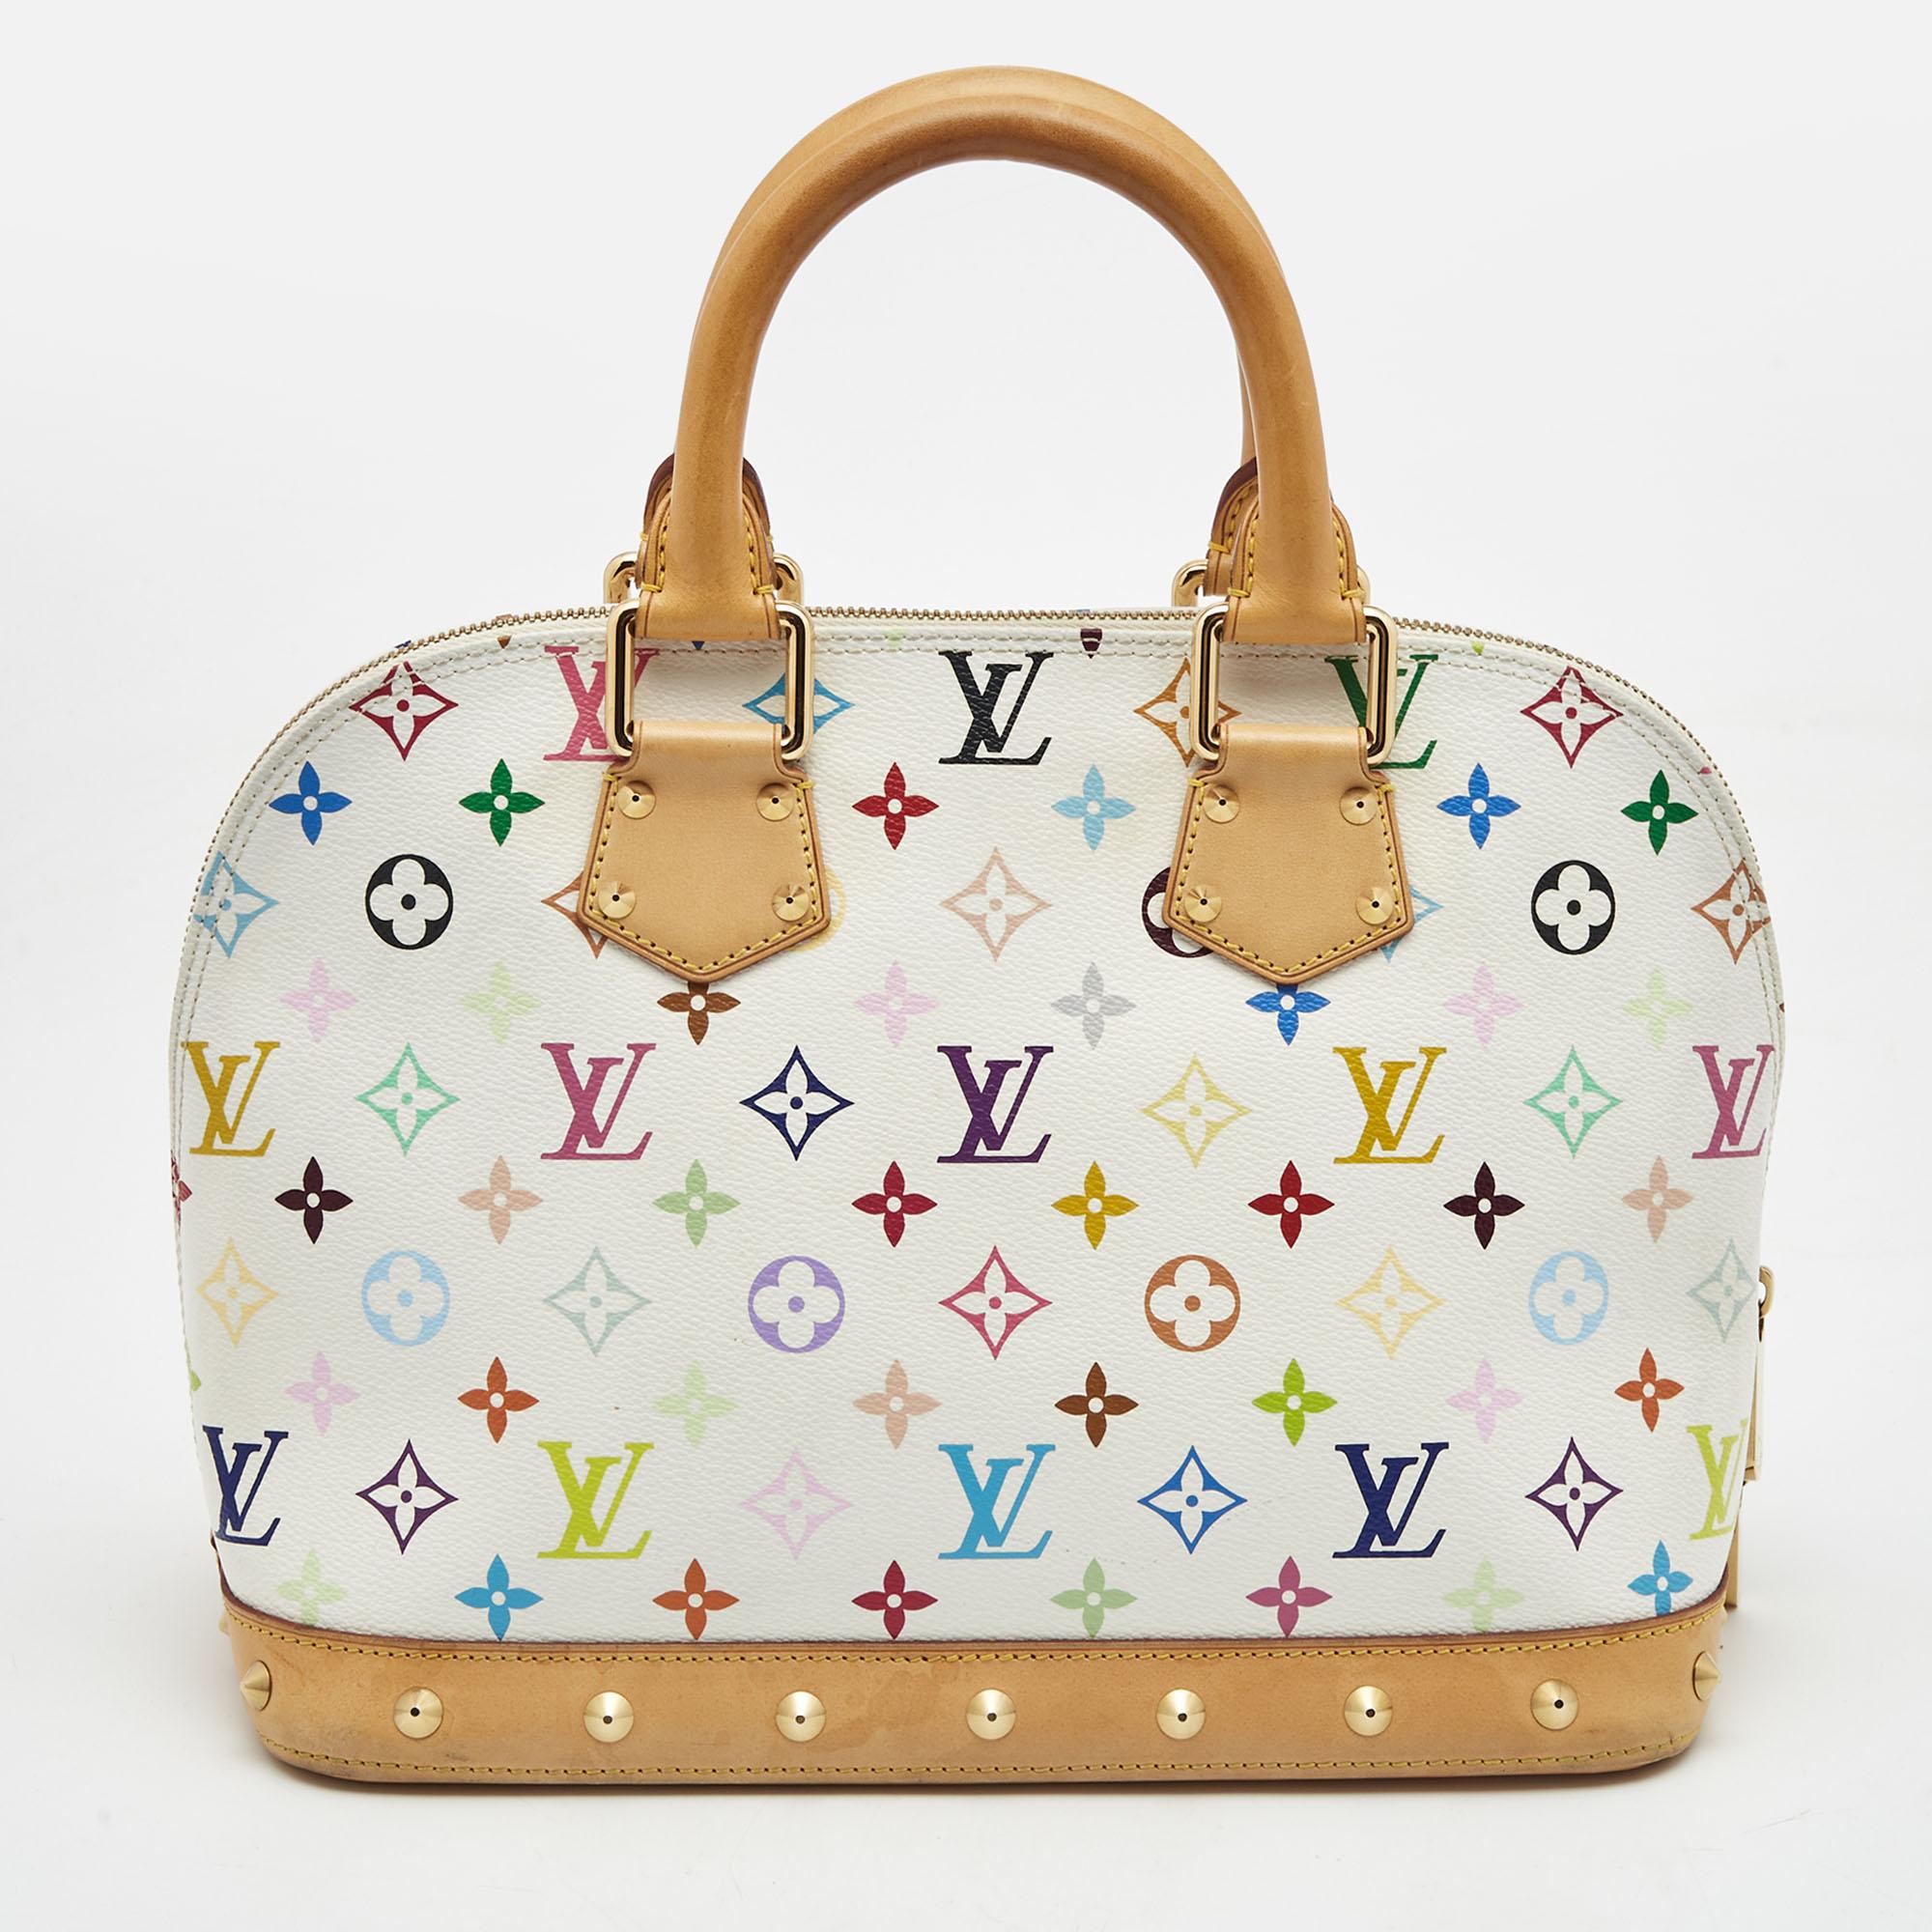 Marked by flawless craftsmanship and enduring appeal, this LV Alma PM bag is bound to be a versatile and durable accessory. It has a spacious size.

